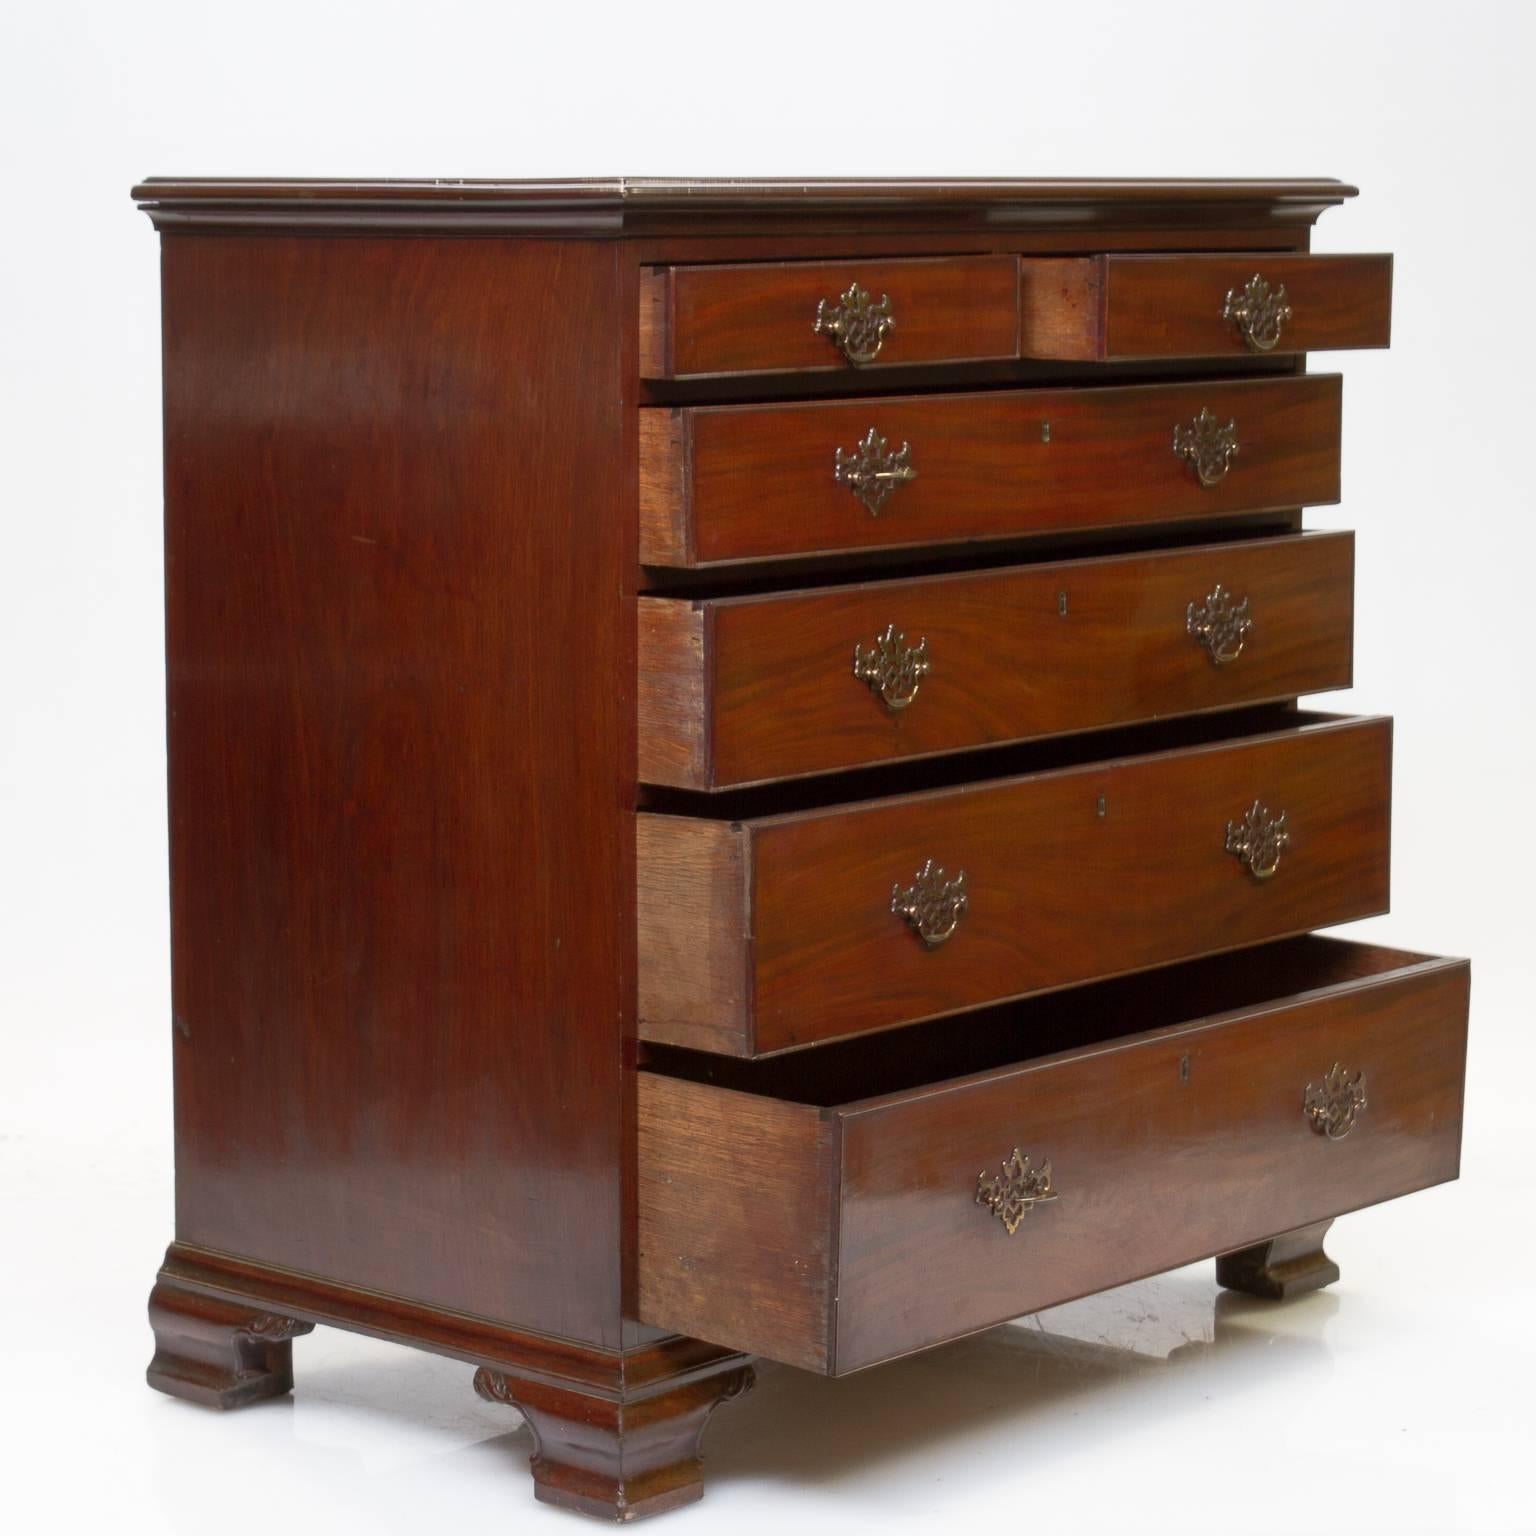 19th century Chippendale mahogany two over four chest of drawers on caved ogee bracket feet. Excellent choice of premier mahogany for the fronts of the drawers, notice the board sides and the beautiful grain and top section. Proper pierced batwing